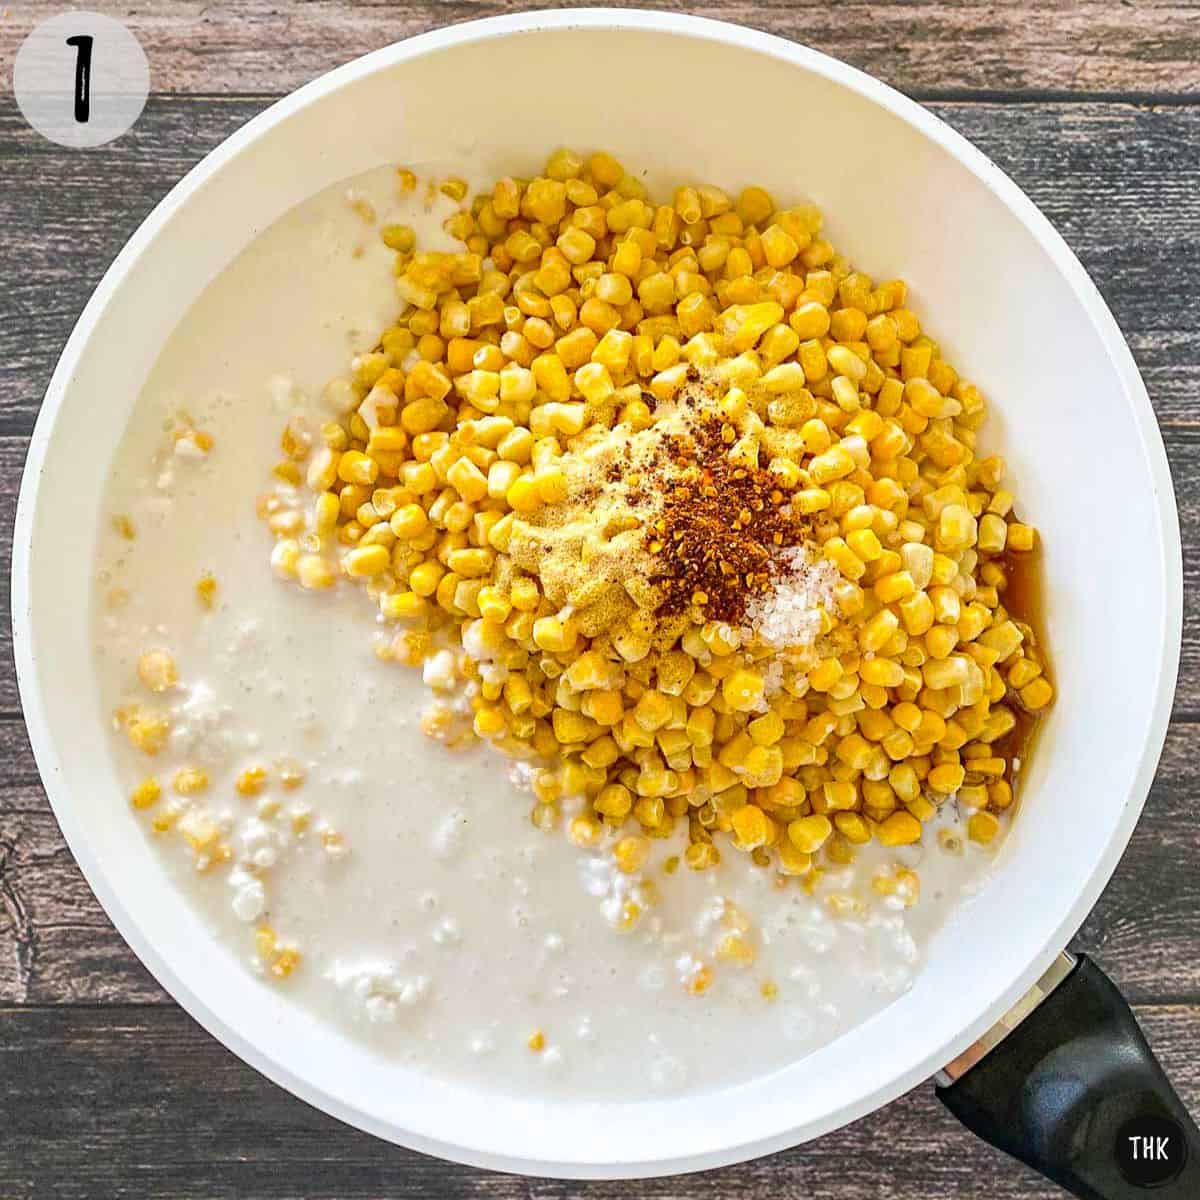 Corn, coconut milk, and spices inside large skillet.